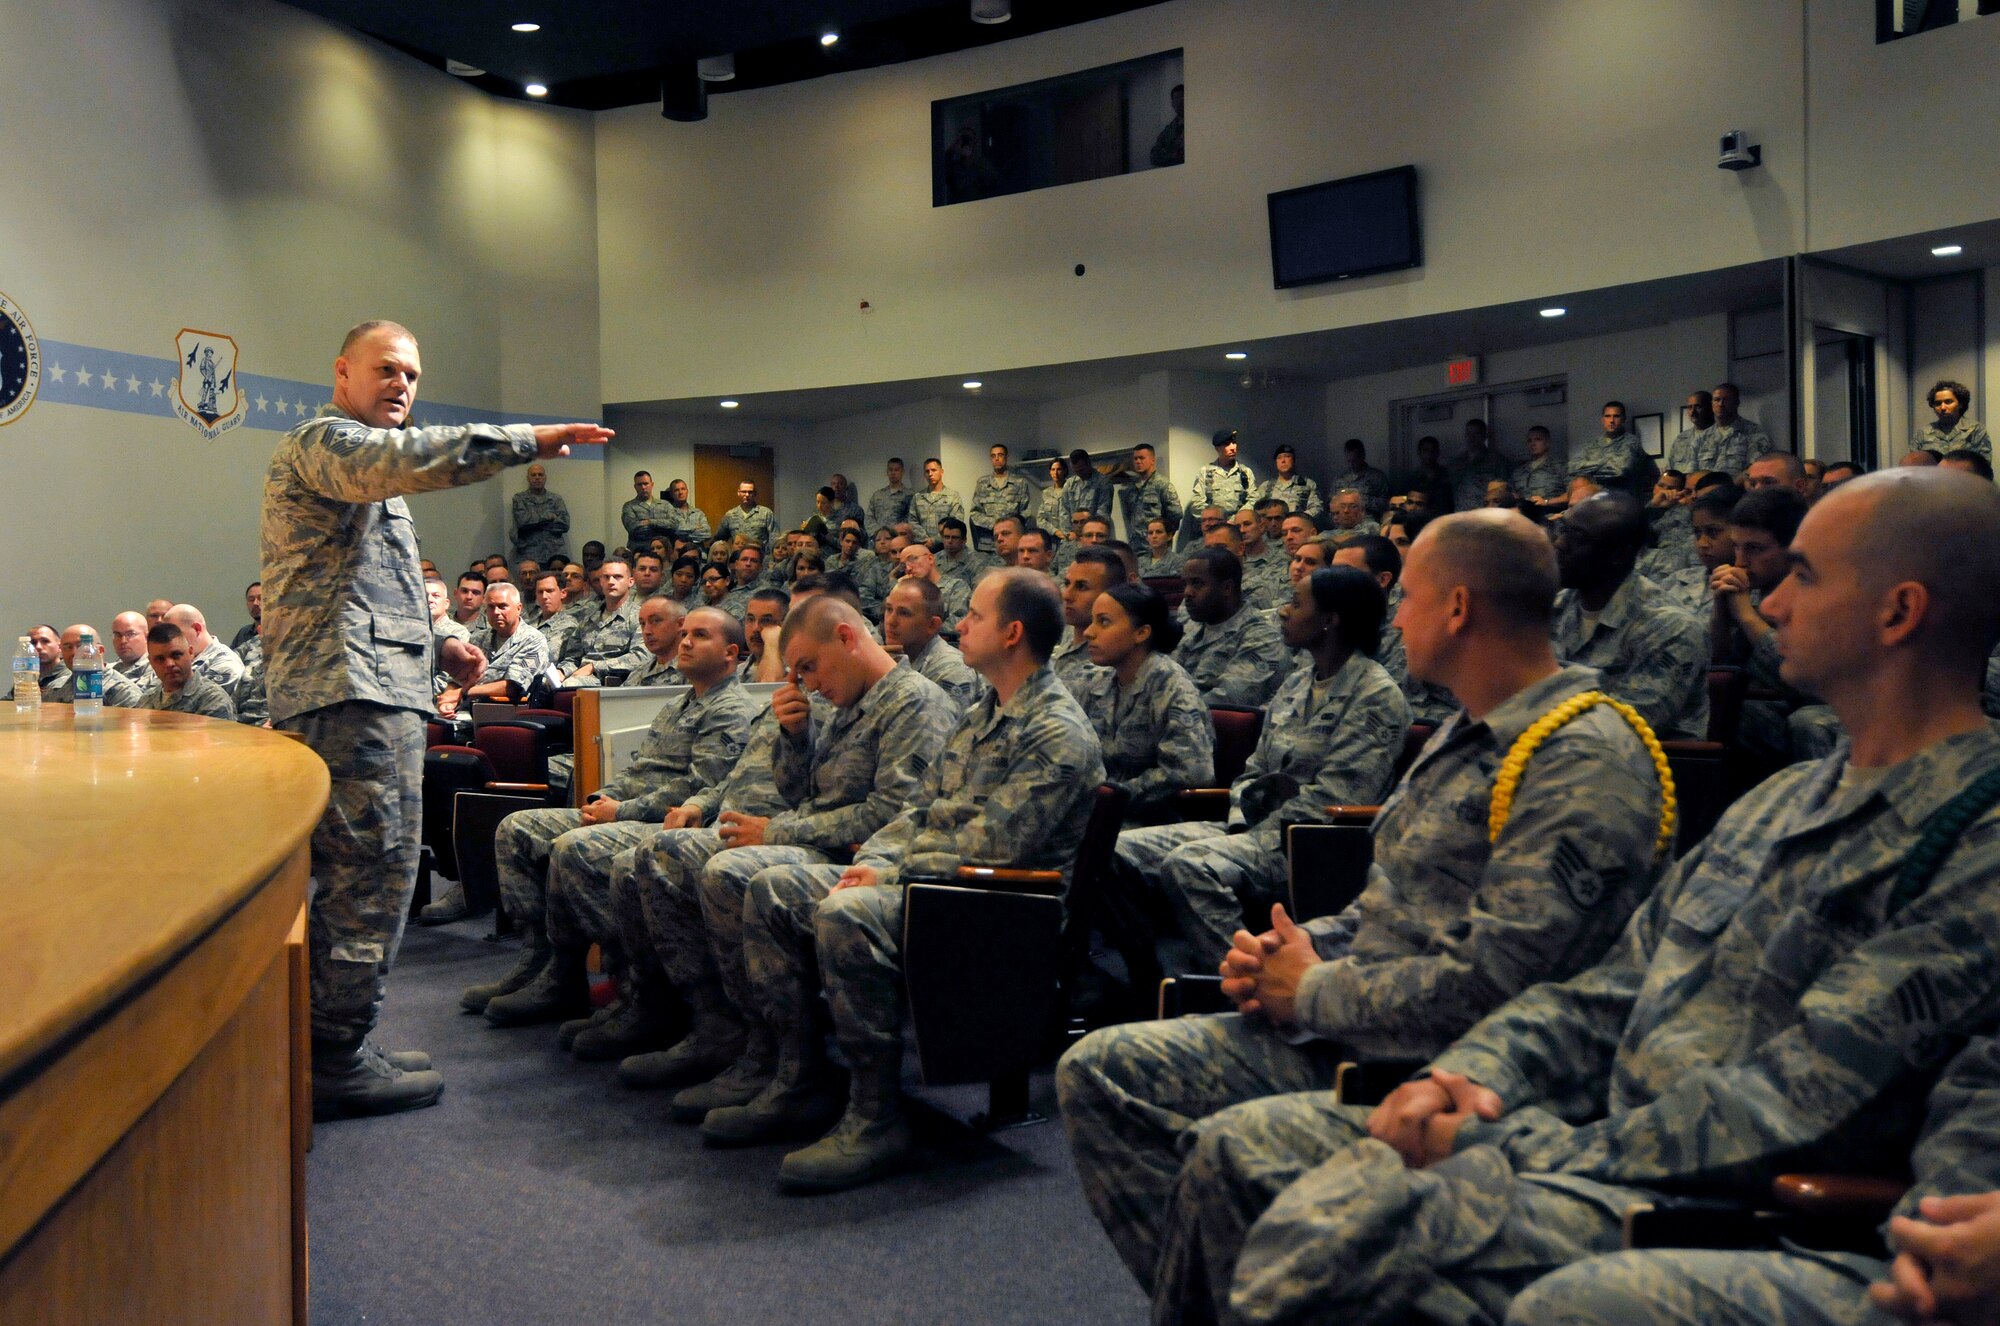 McGHEE TYSON AIR NATIONAL GUARD BASE, Tenn. - Chief Master Sergeant of the Air Force James A. Roy addresses base airmen at Spruance Hall on the campus of the I.G. Brown Training and Education Center here, July 17, 2012. During his visit, Chief Roy toured facilities, met with enlisted personnel and received briefings from numerous tenant units. (National Guard photo by Master Sgt. Kurt Skoglund/Released)